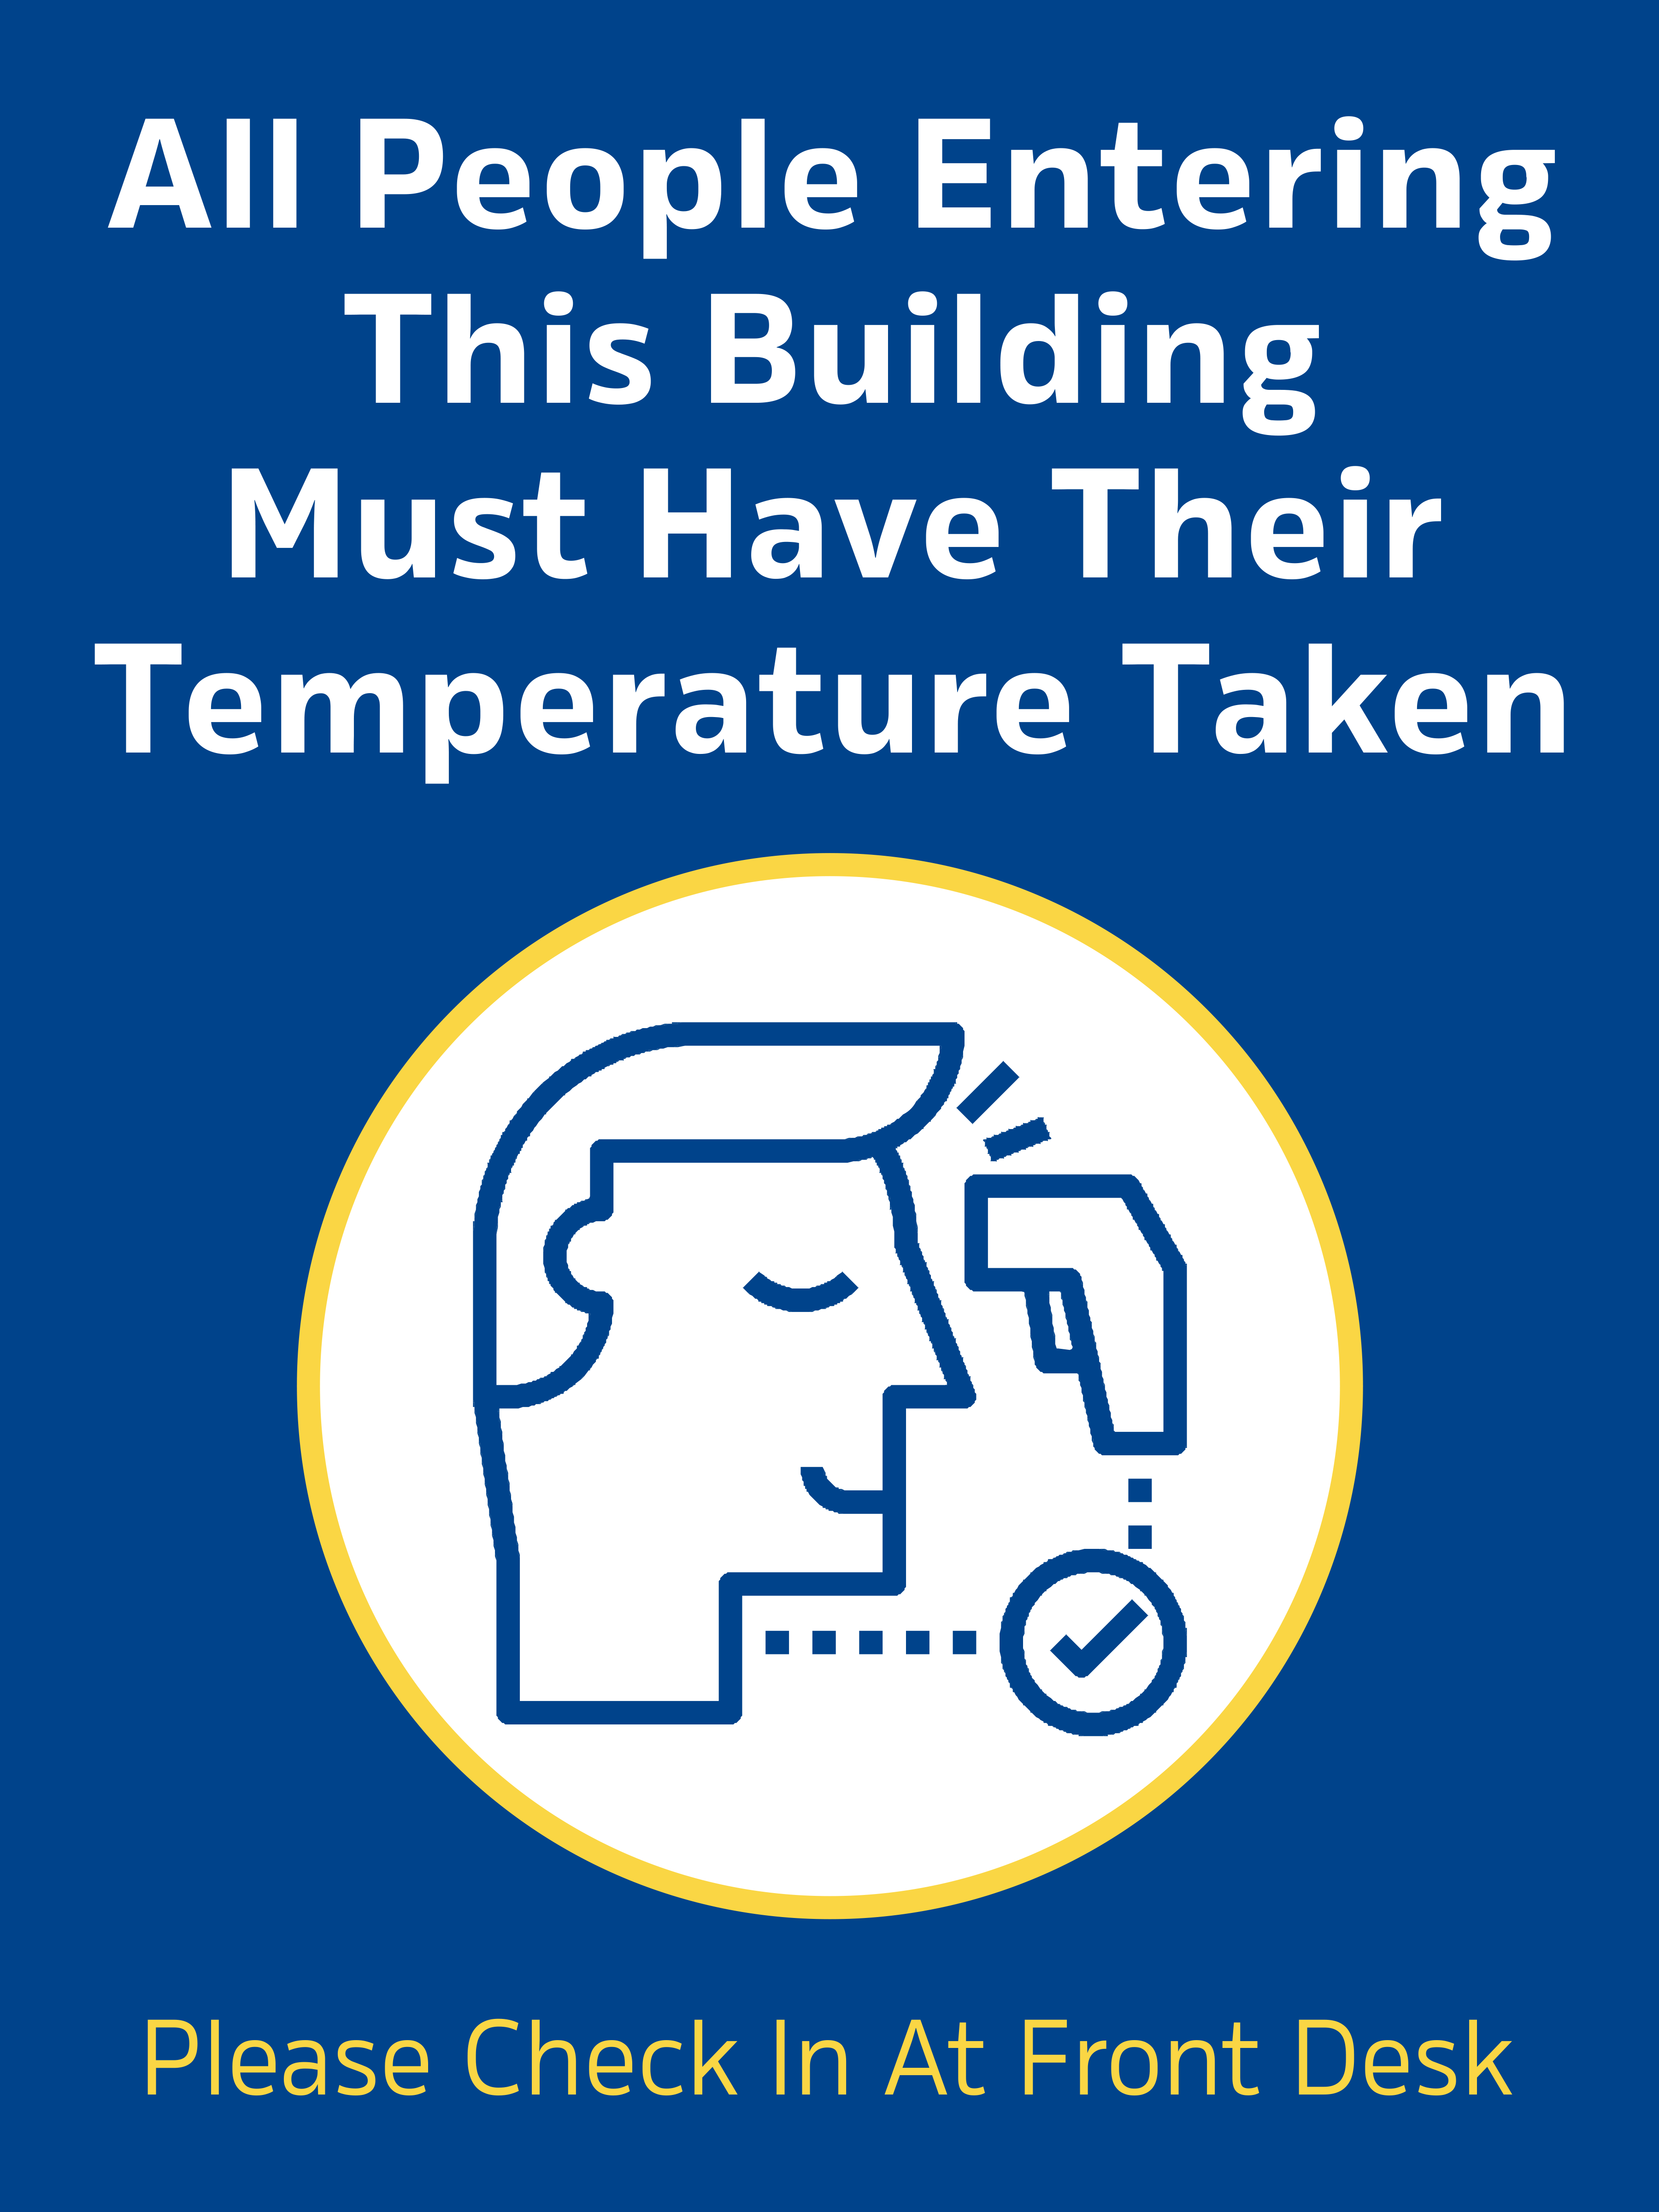 COVID signs can show the rules for the check in process, including taking temperatures. With these businesses can maintain customer and staff safety.